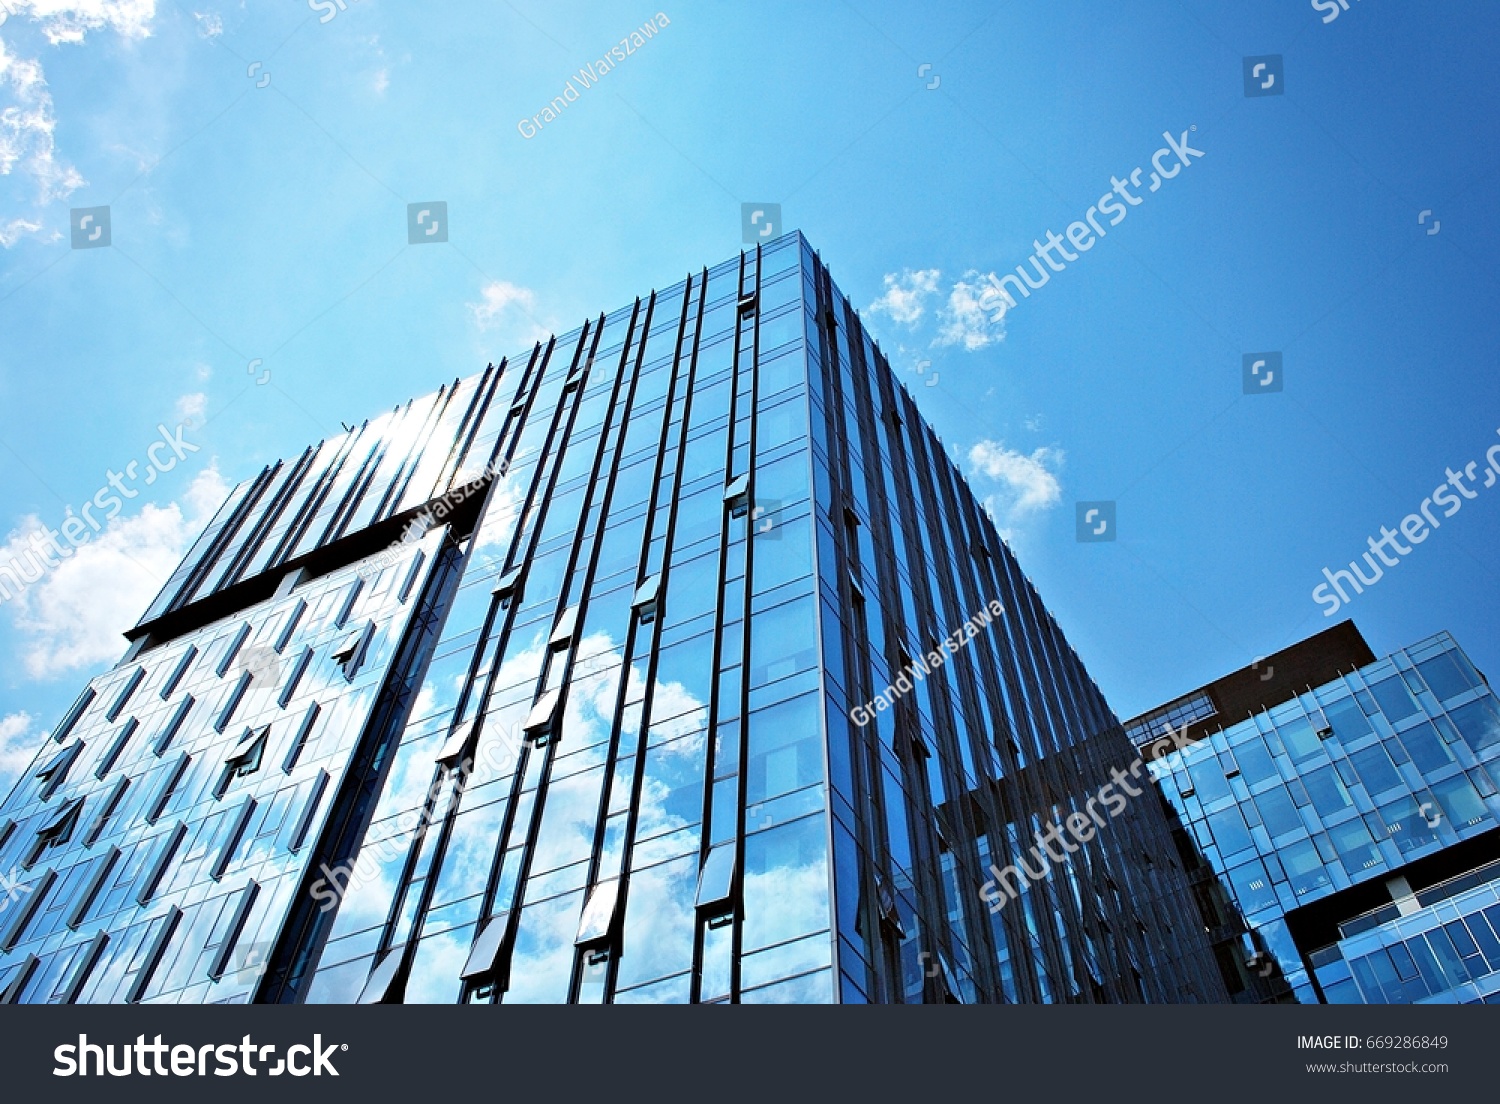 Modern building.Modern office building with facade of glass #669286849